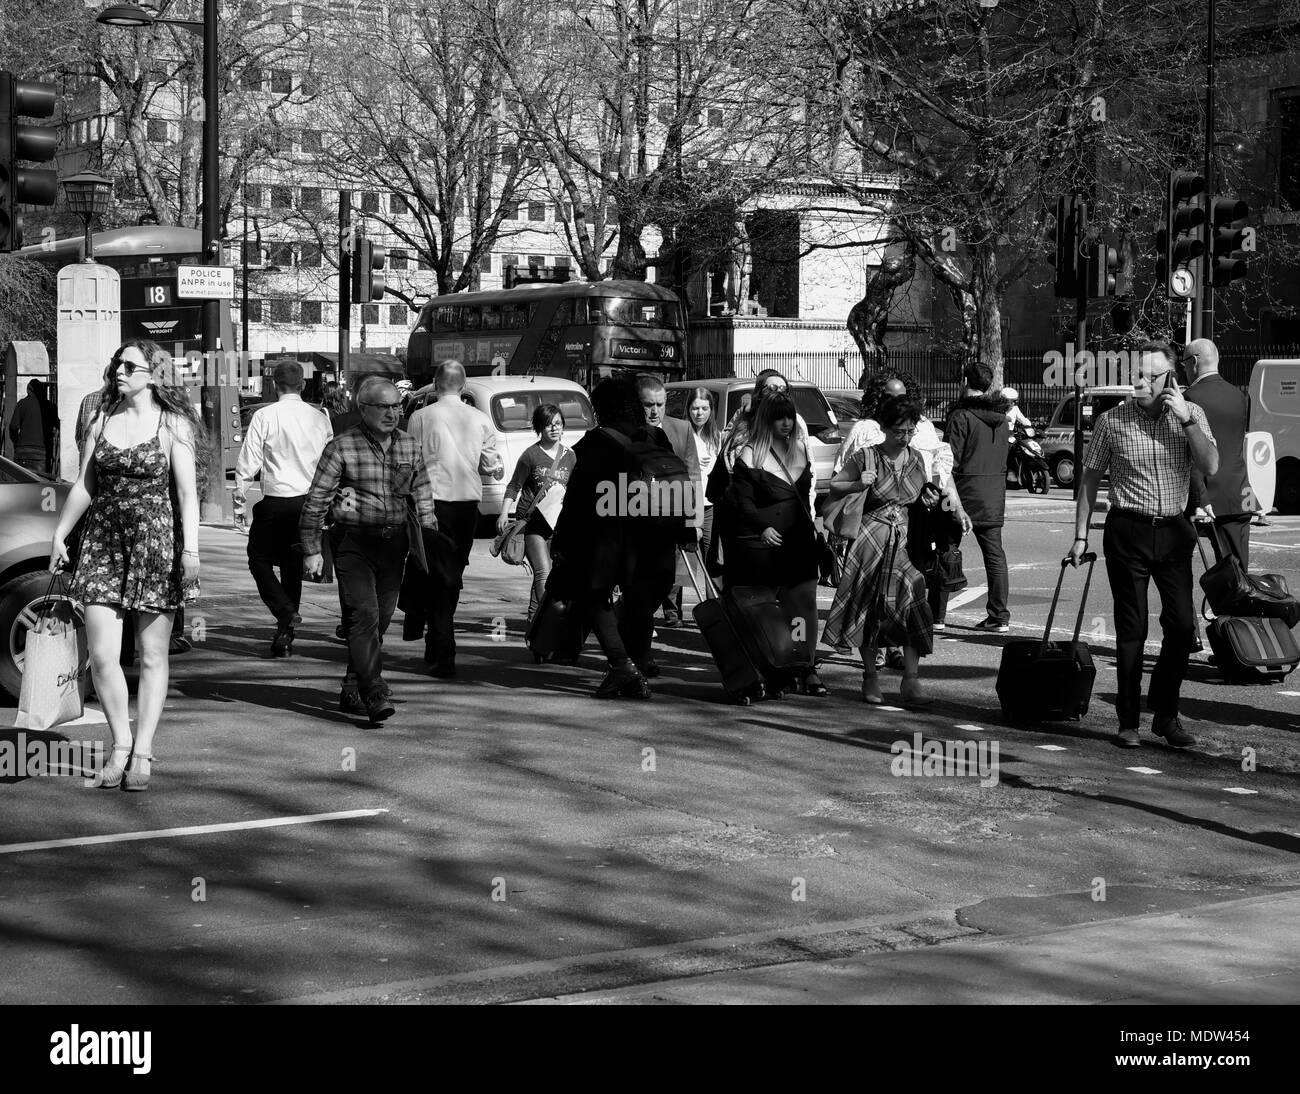 Man walking ahead of woman Black and White Stock Photos & Images - Alamy